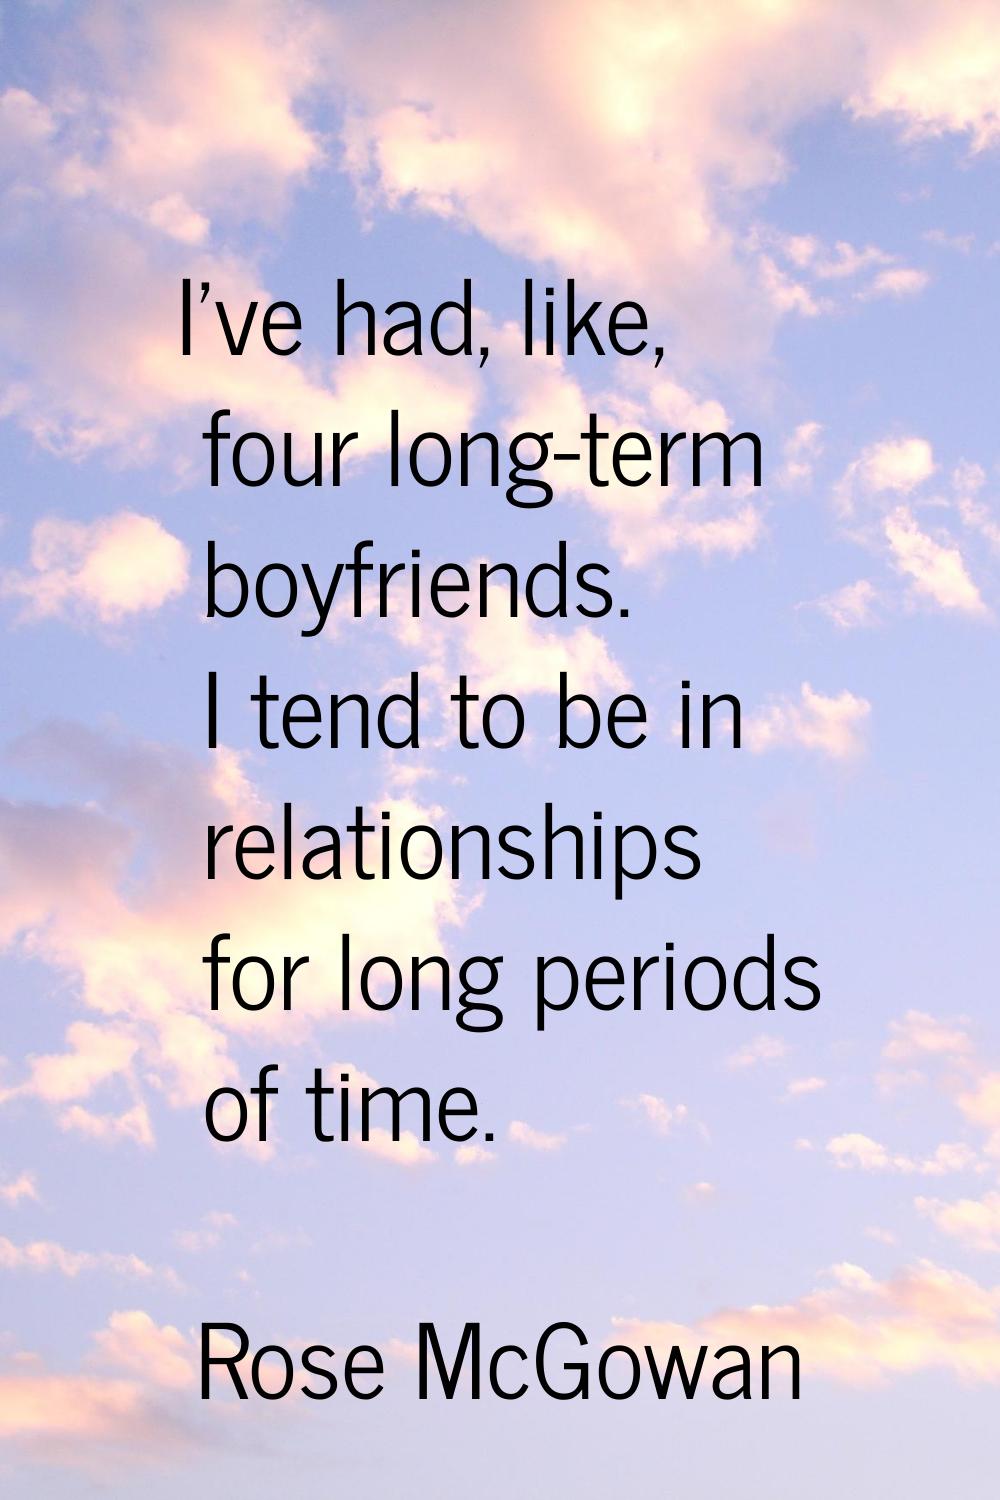 I've had, like, four long-term boyfriends. I tend to be in relationships for long periods of time.